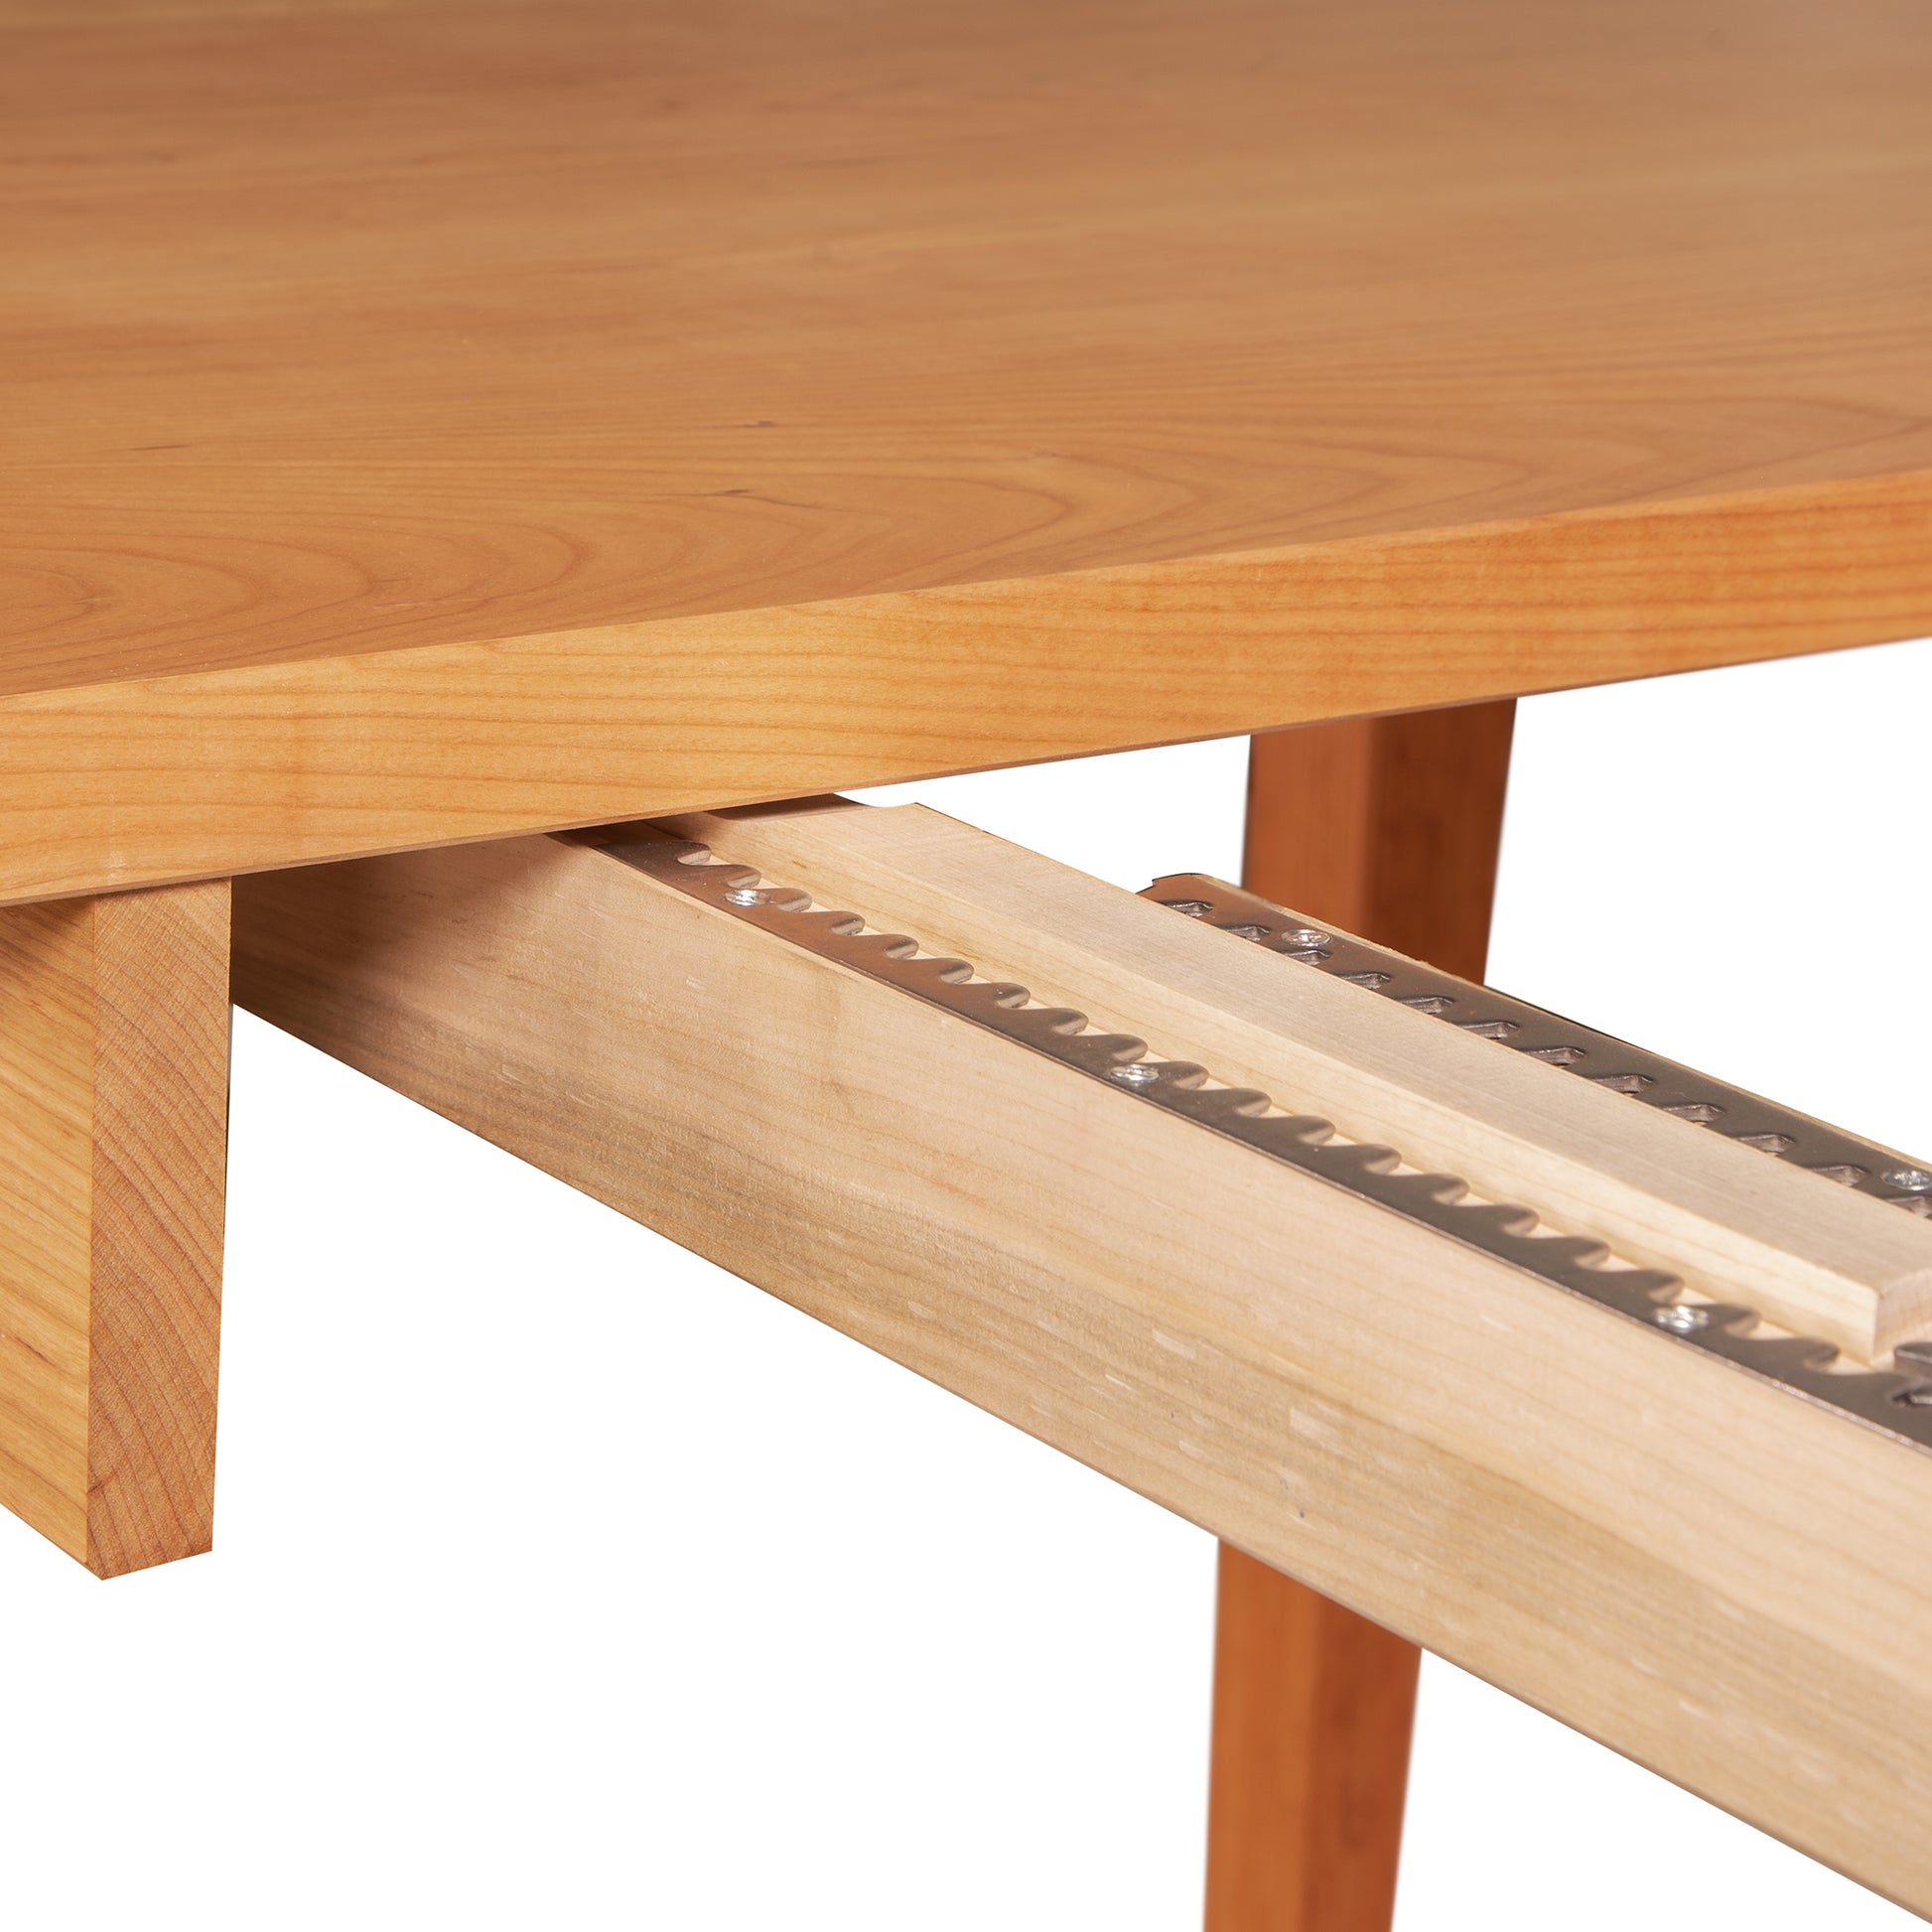 A handcrafted solid wood Vermont Shaker Rectangular Extension Dining Table, inspired by Maple Corner Woodworks.